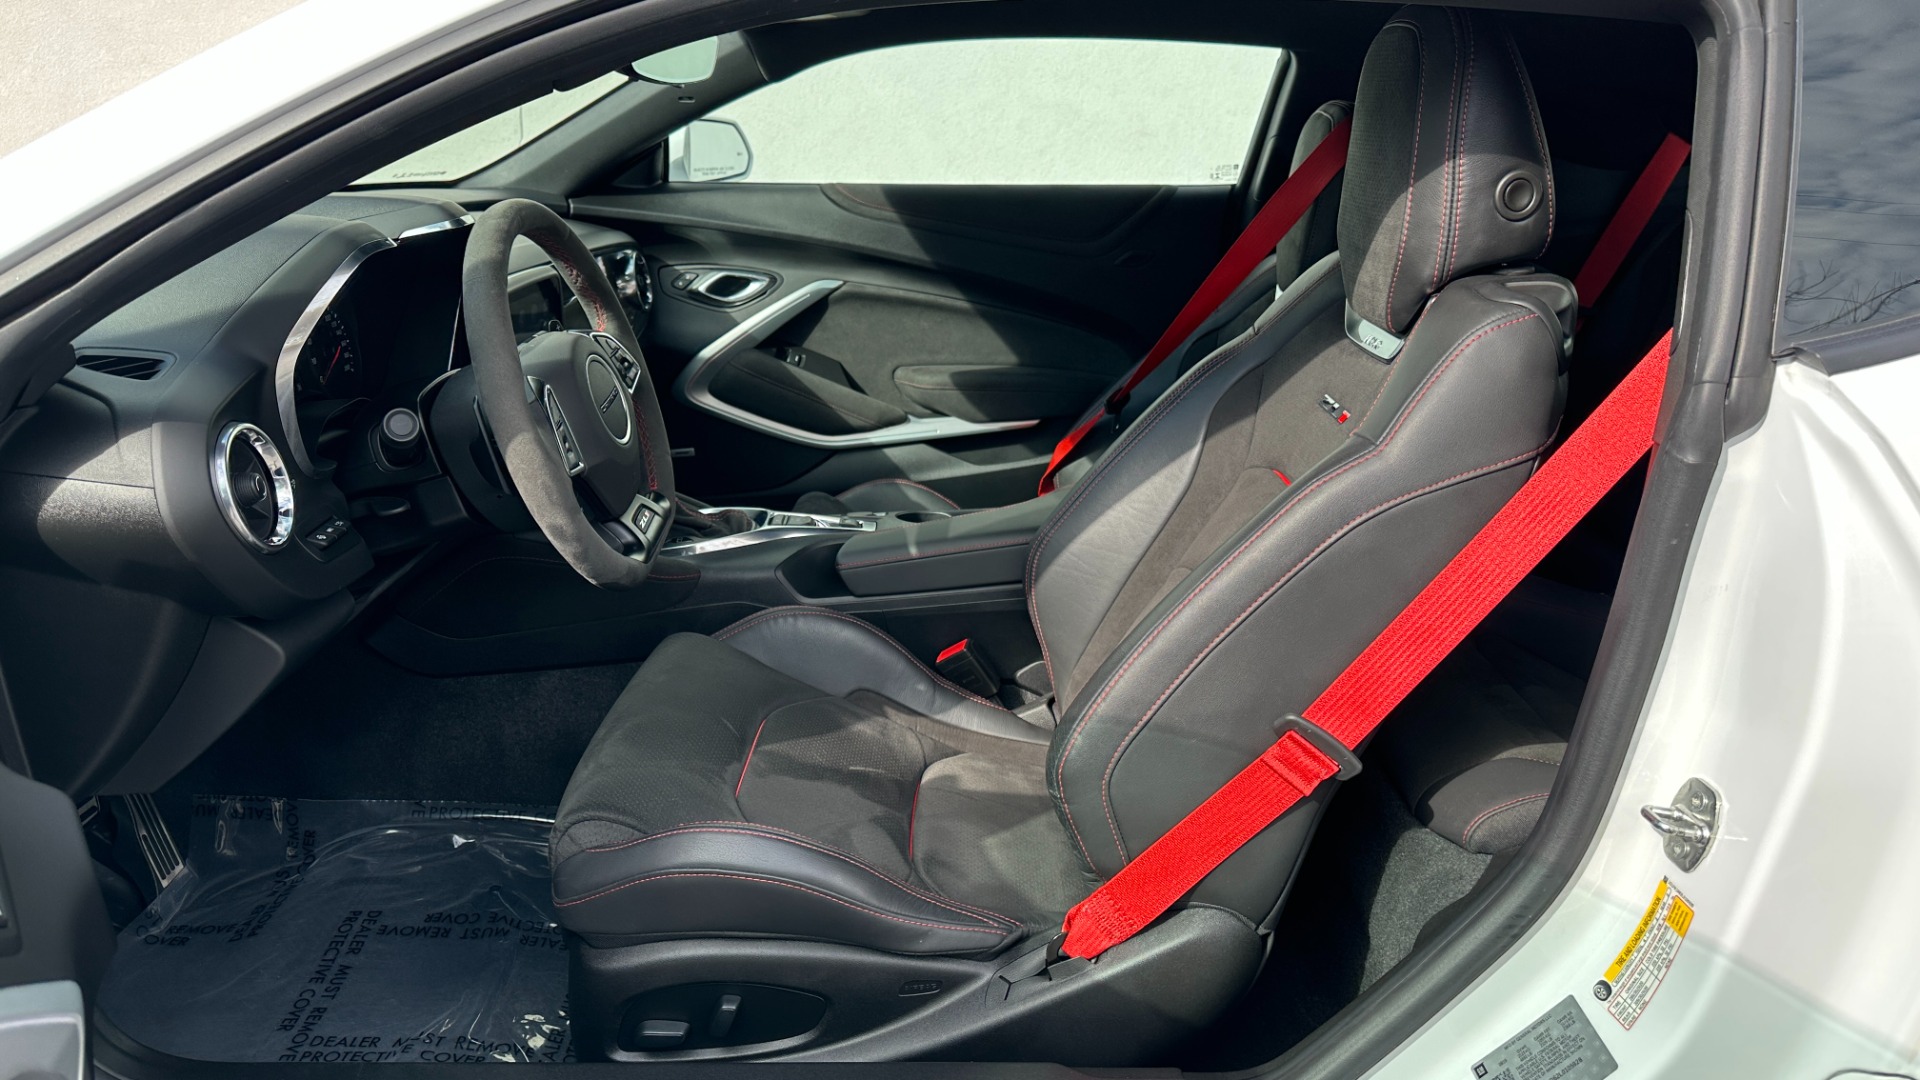 Used 2020 Chevrolet Camaro ZL1 / SUPERCHARGED / CARBON FIBER / RED SEAT BELTS / RECARO SEATING / 10SPD for sale $66,995 at Formula Imports in Charlotte NC 28227 13